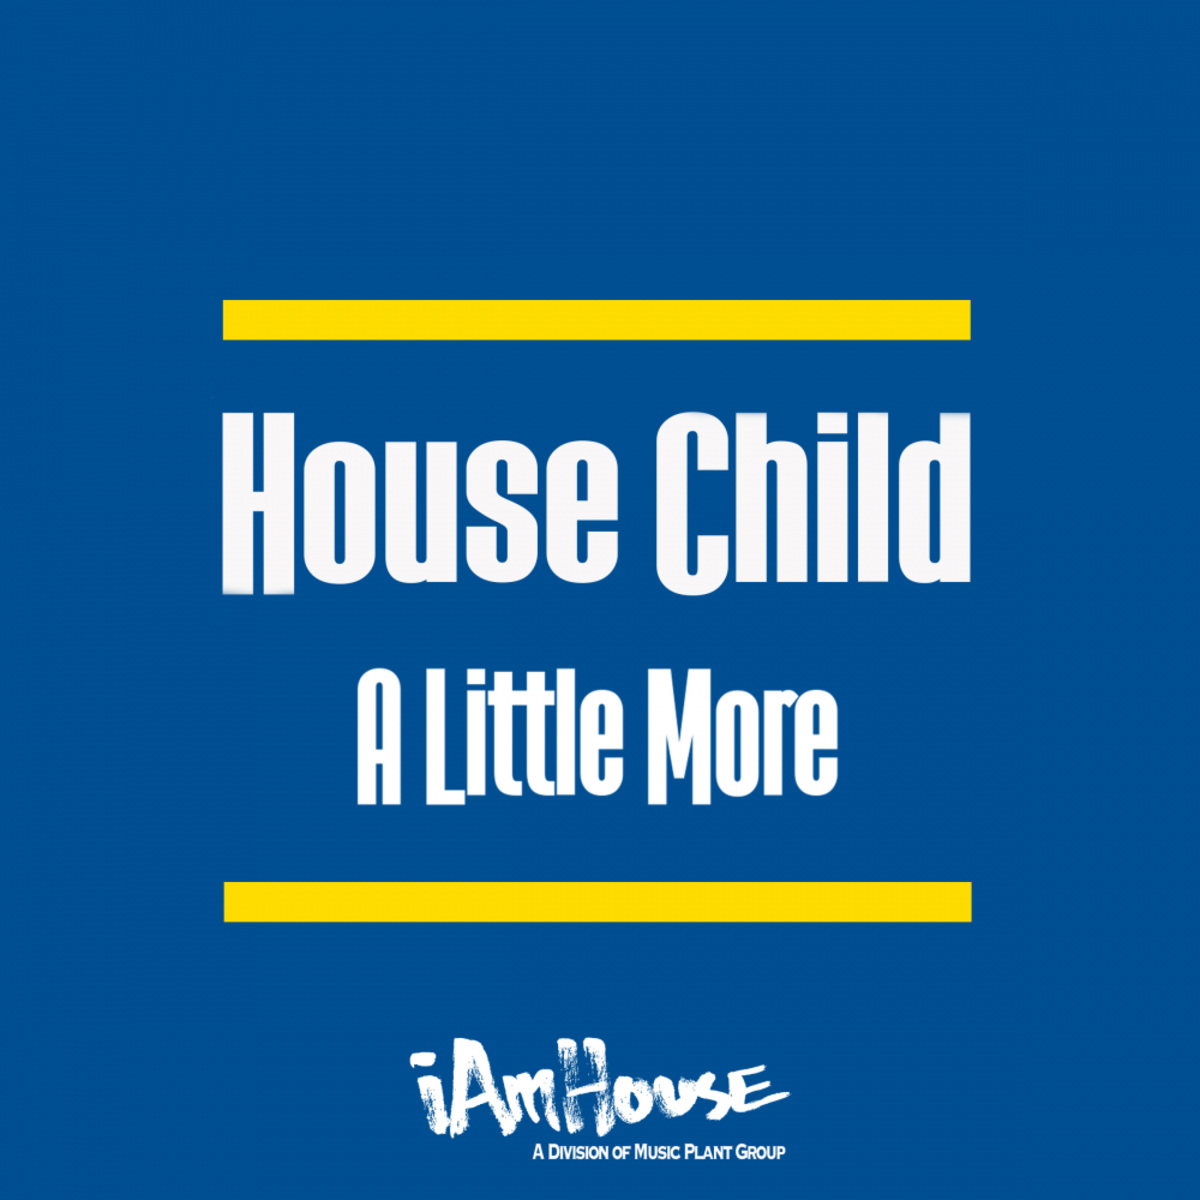 House Child - A Little More / I Am House